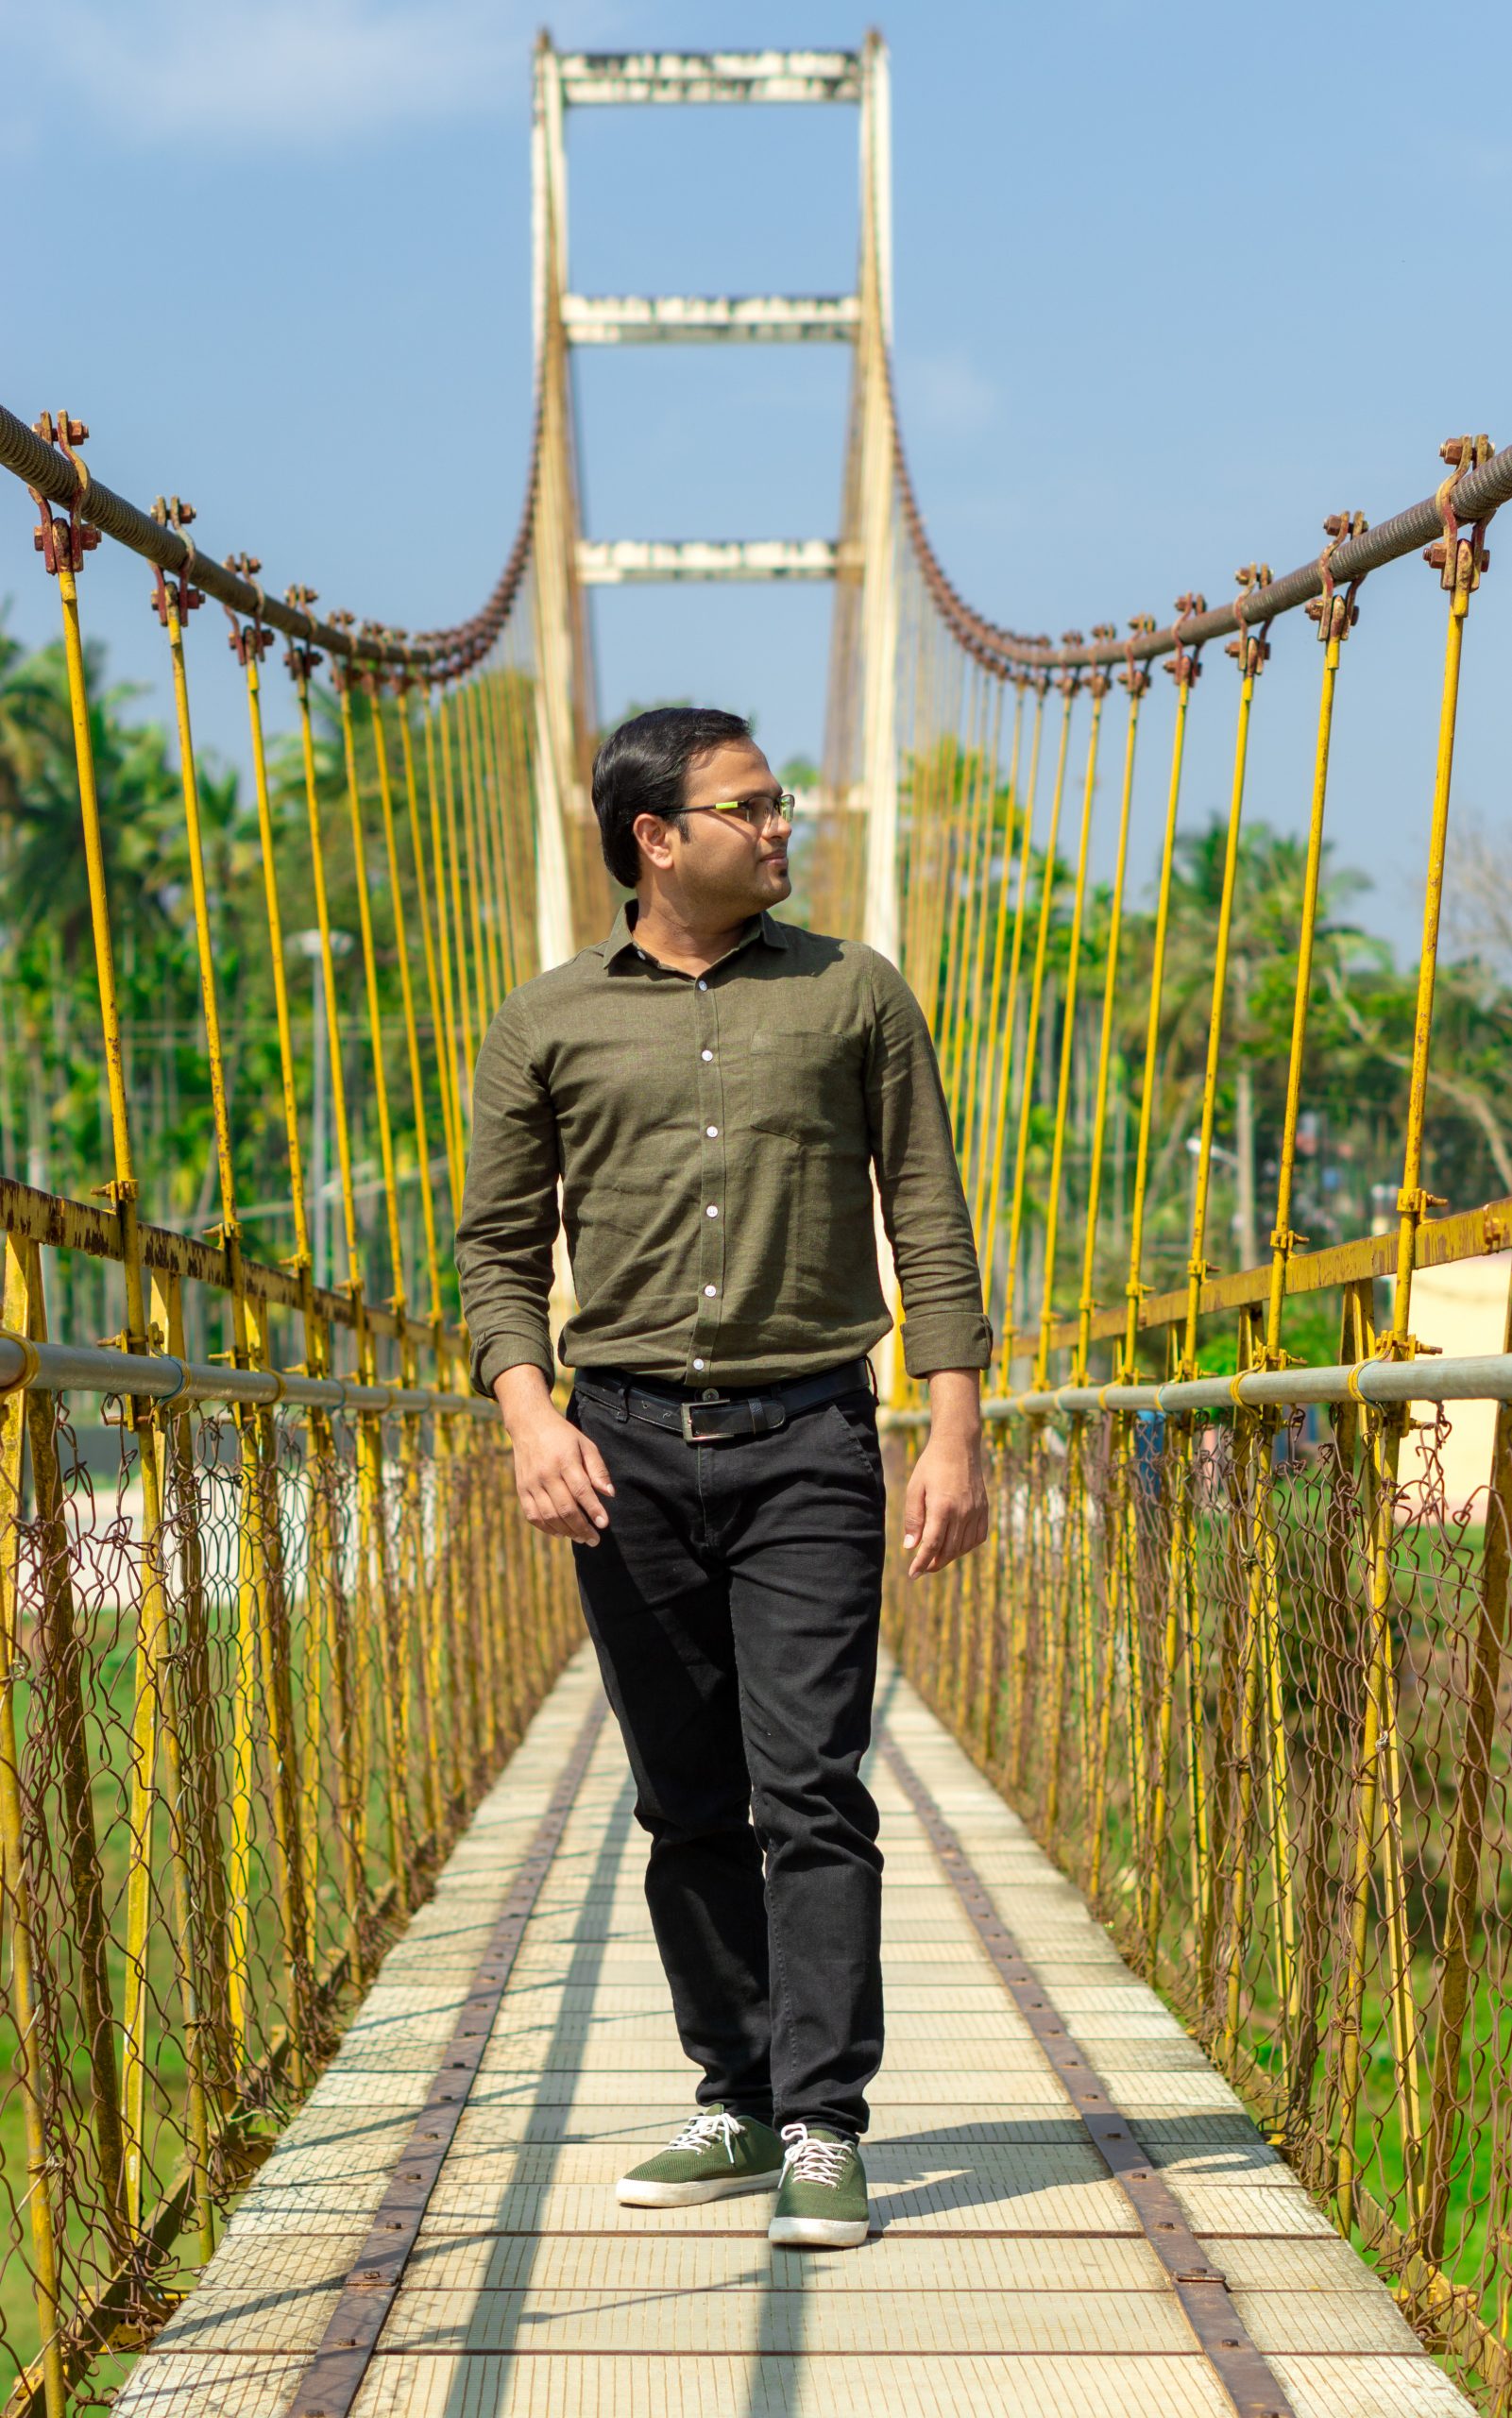 A person posing on a hanging bridge